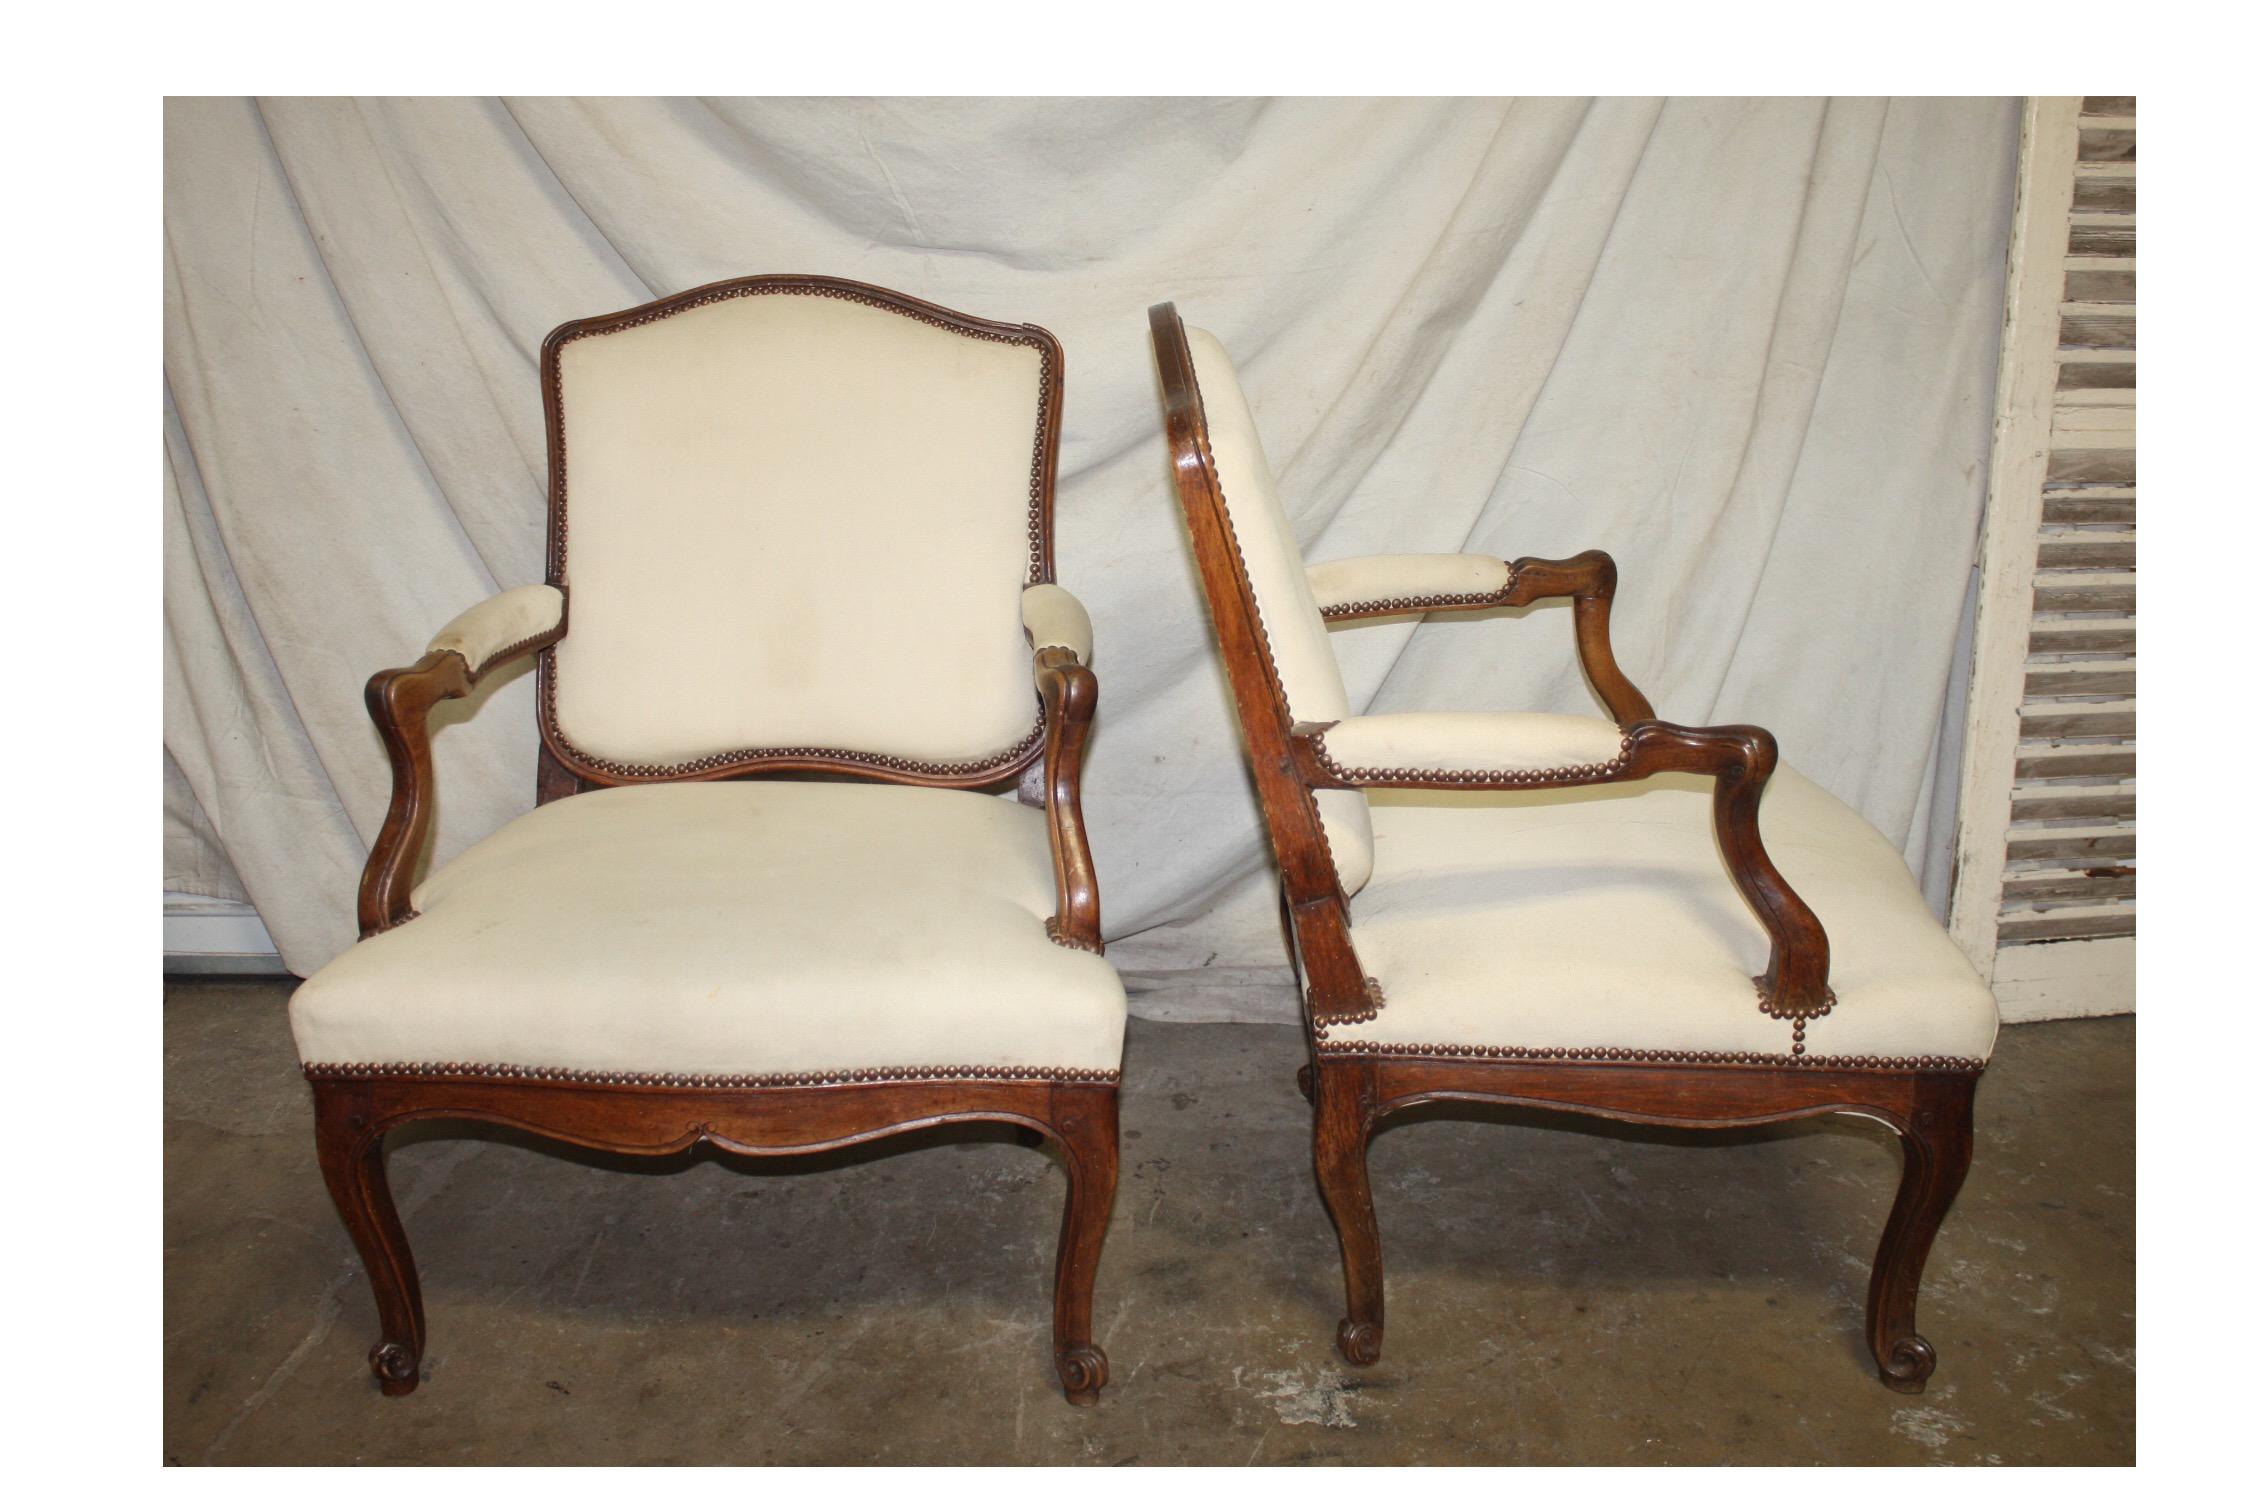 Beautiful pair of 18th century French armchairs.